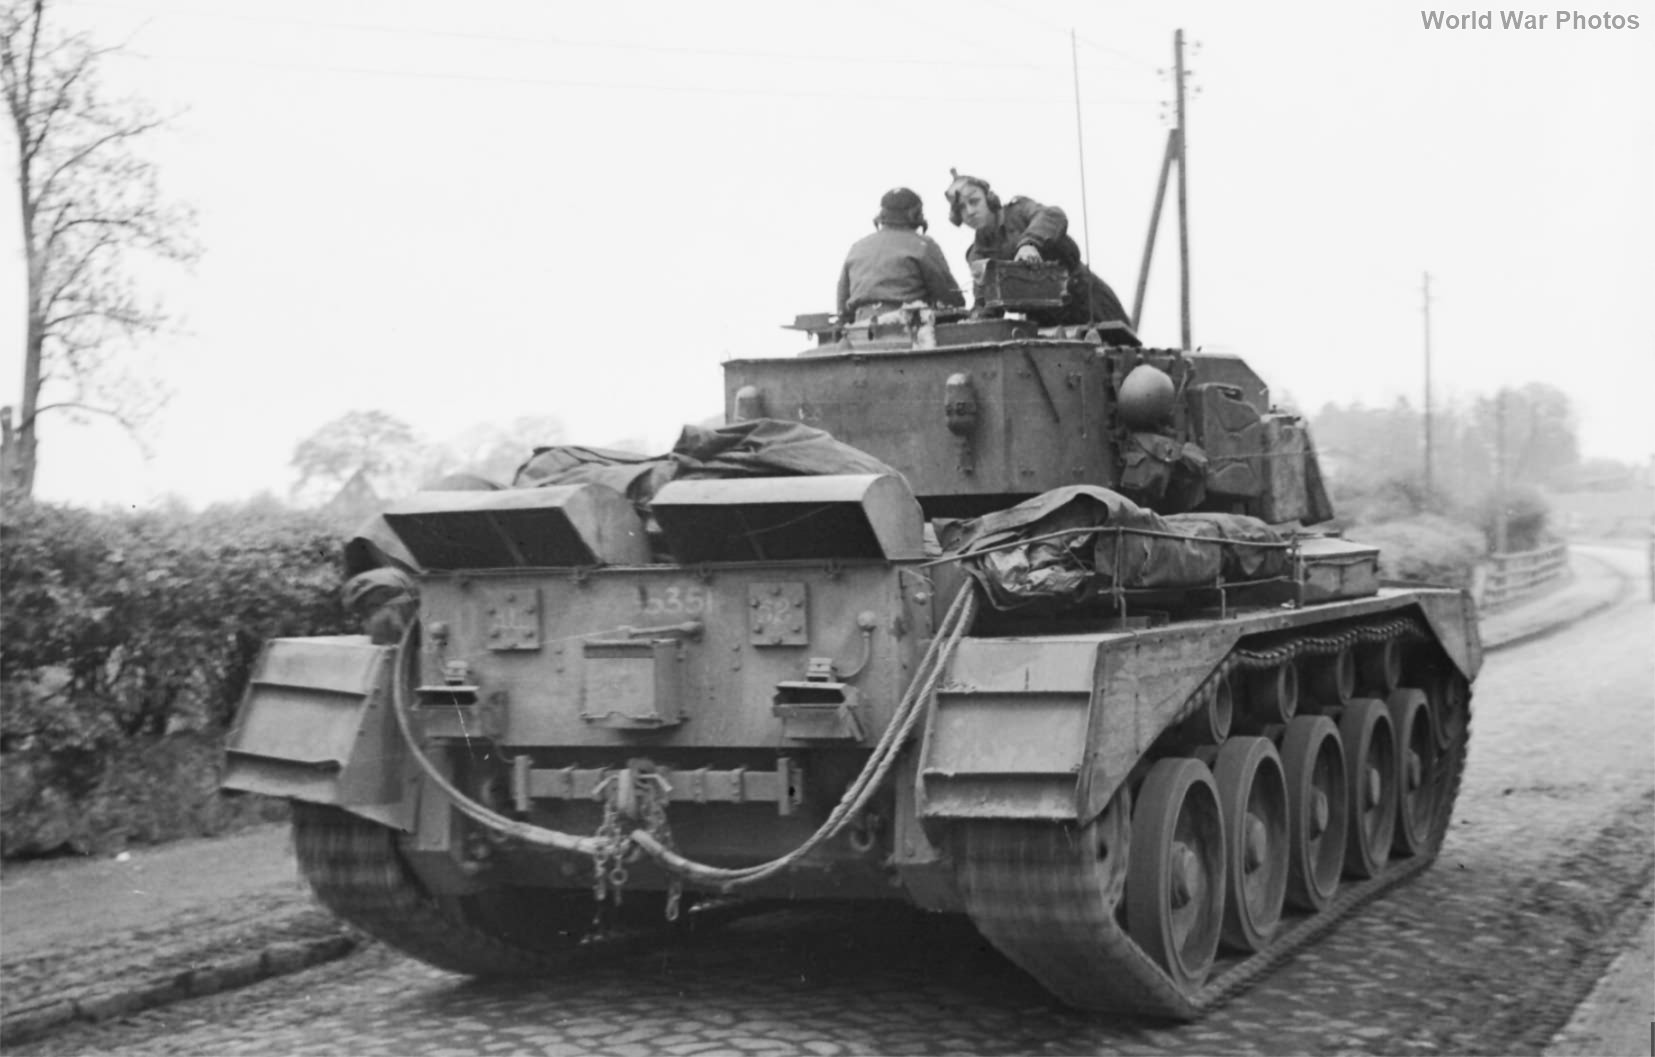 Comet of 3rd RTR near Lubeck 2 May 1945